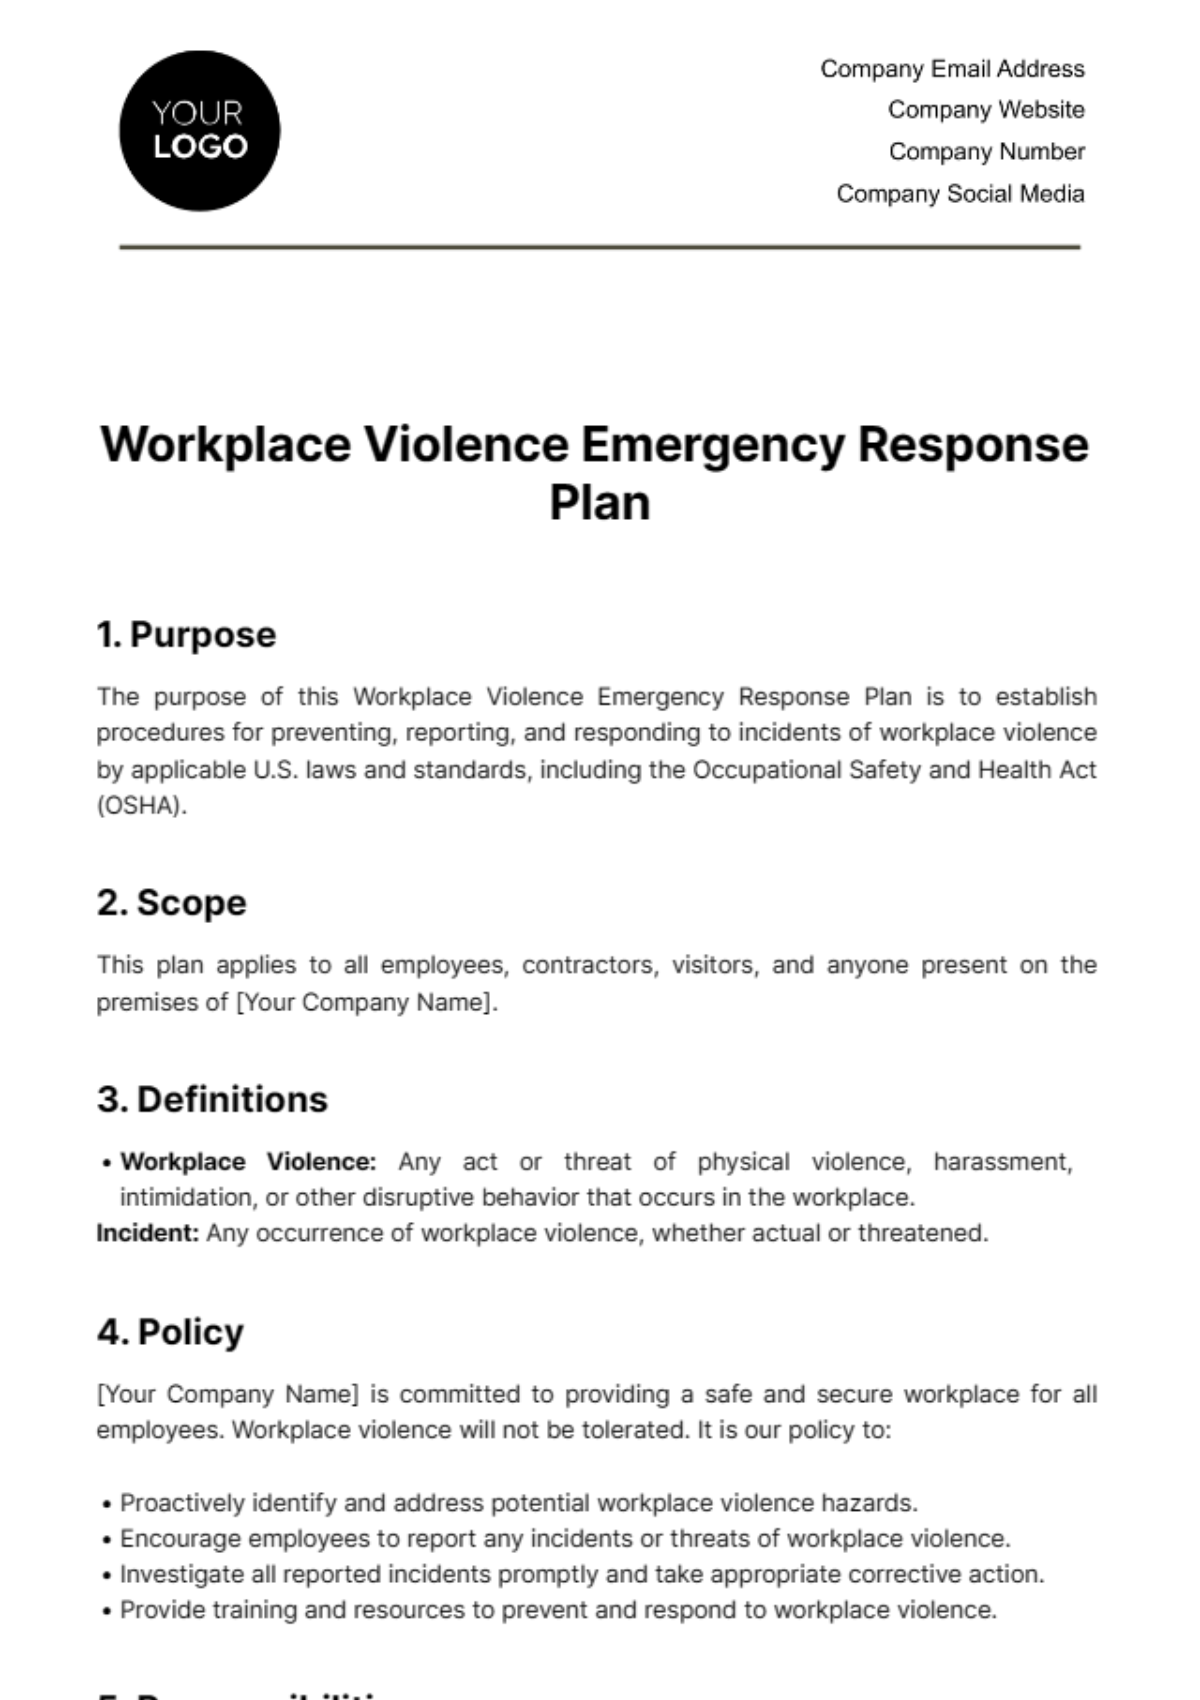 Workplace Violence Emergency Response Plan Template